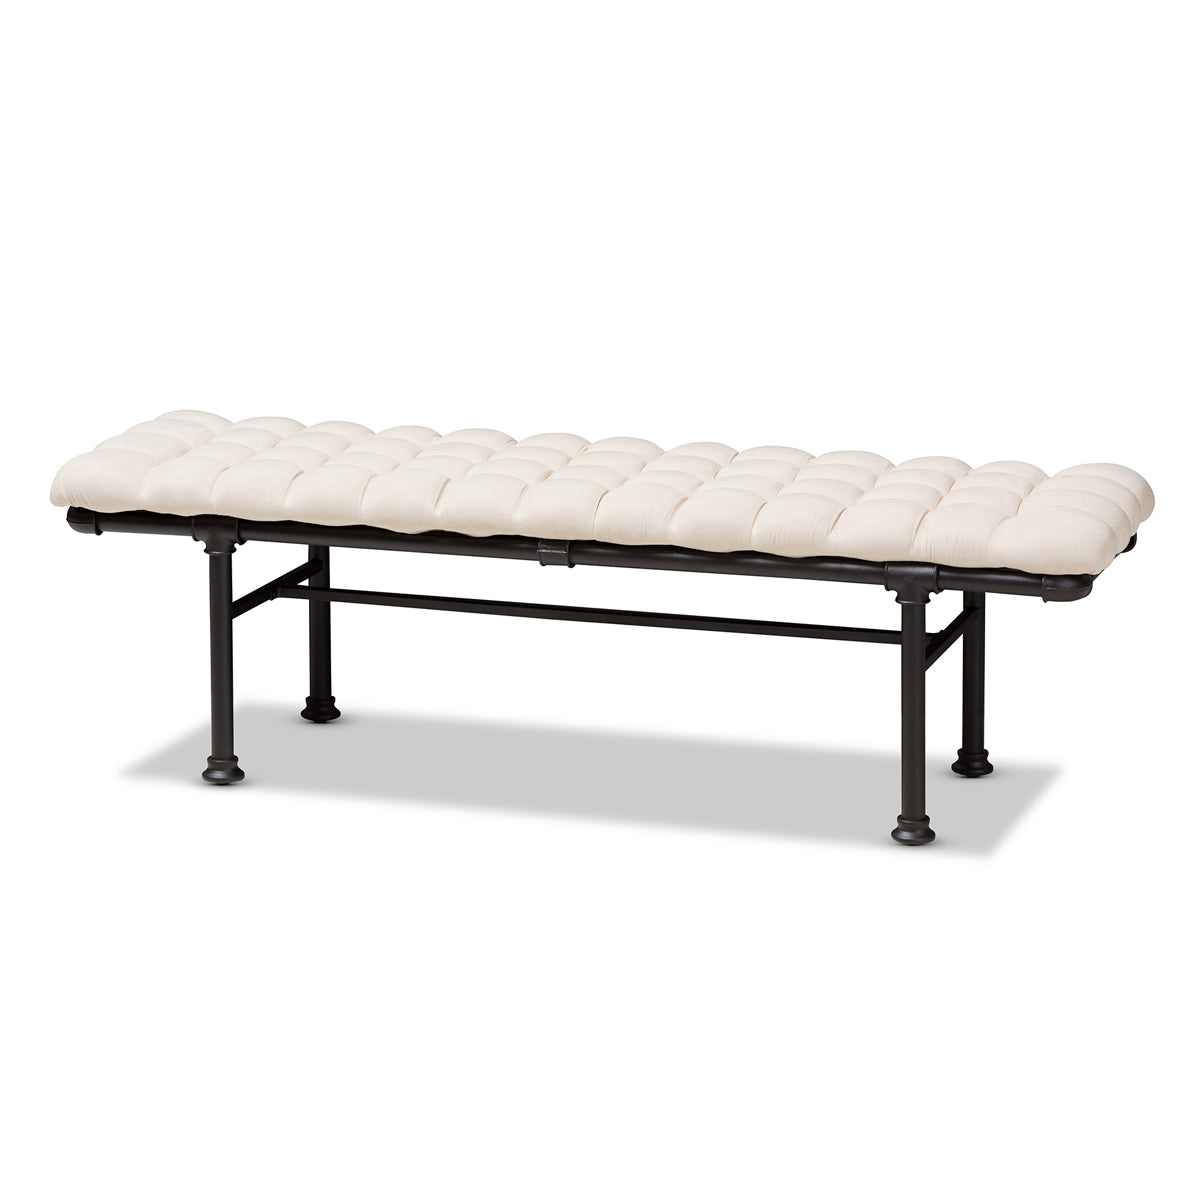 Baxton Studio Zelie Rustic and Industrial Light Beige Fabric Upholstered Bench Baxton Studio-benches-Minimal And Modern - 1